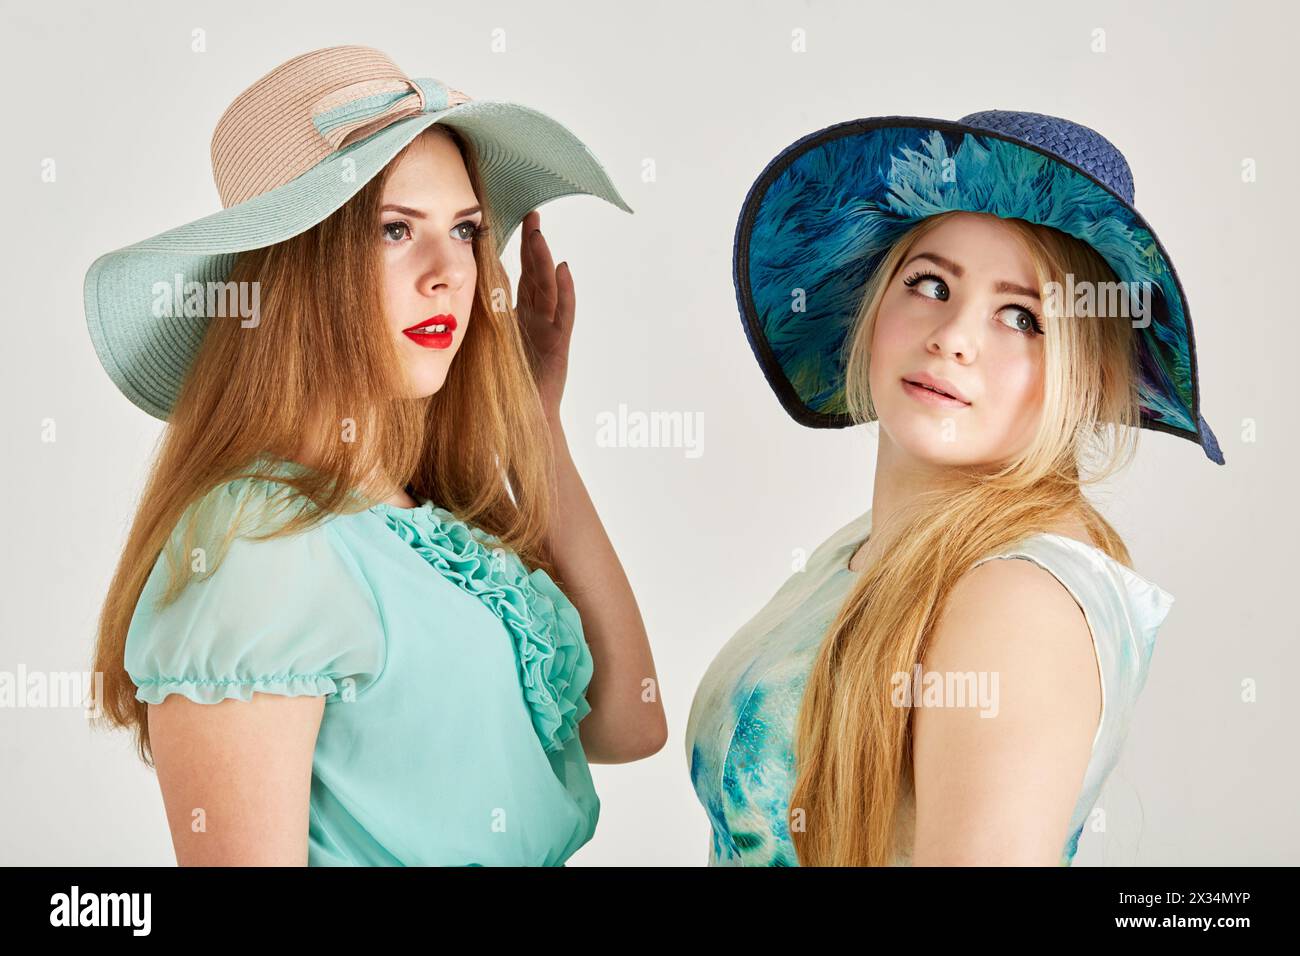 Two young blond women in wide-brimmed hats in studio. Stock Photo